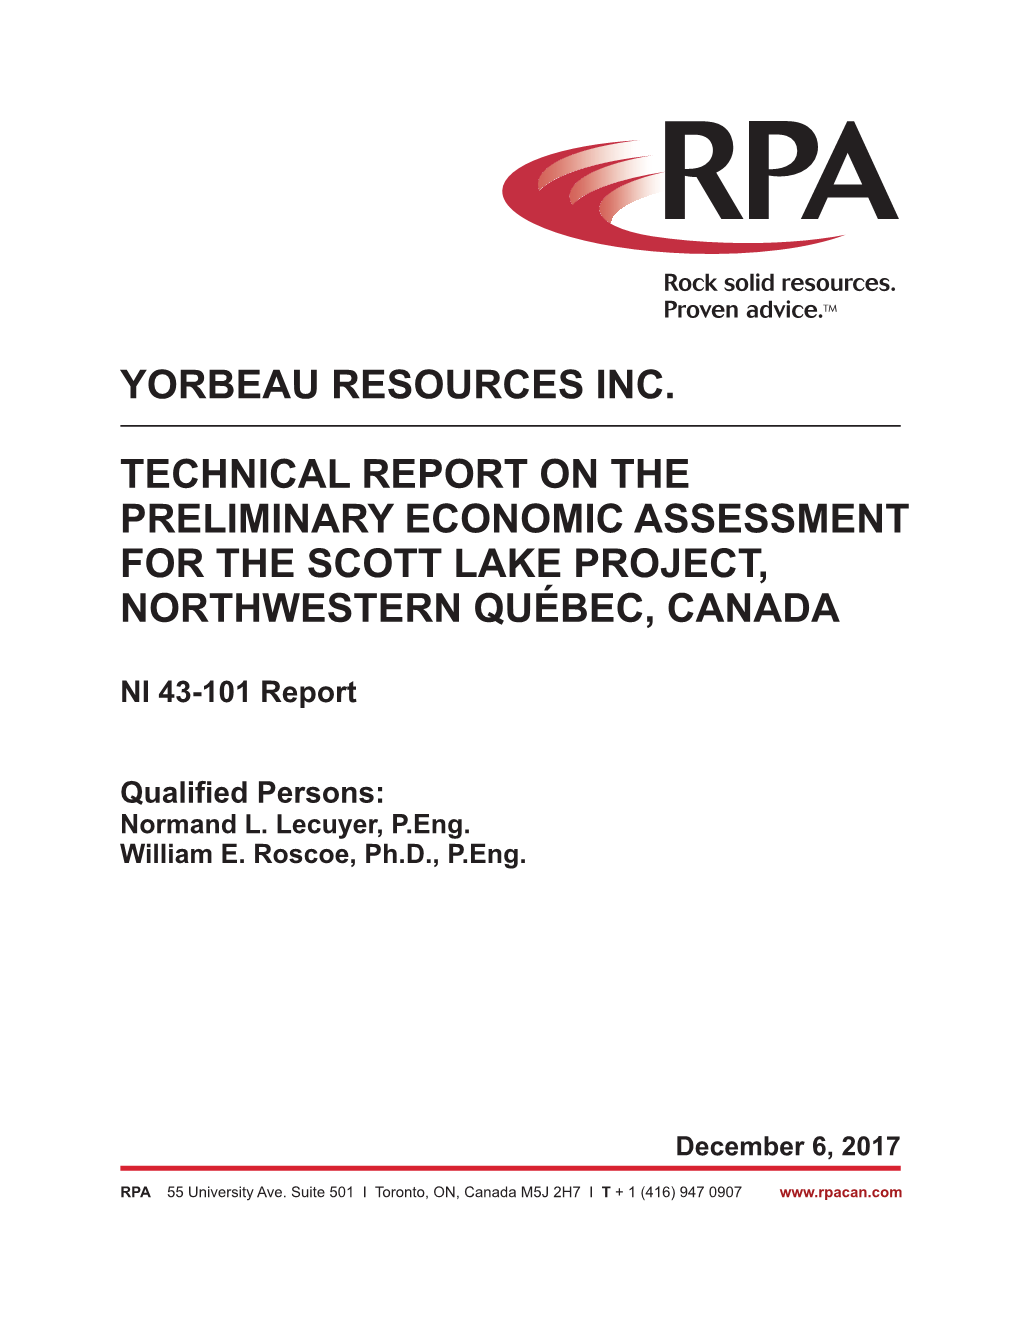 Yorbeau Resources Inc. Technical Report on the Preliminary Economic Assessment for the Scott Lake Project, Northwestern Québec, Canada